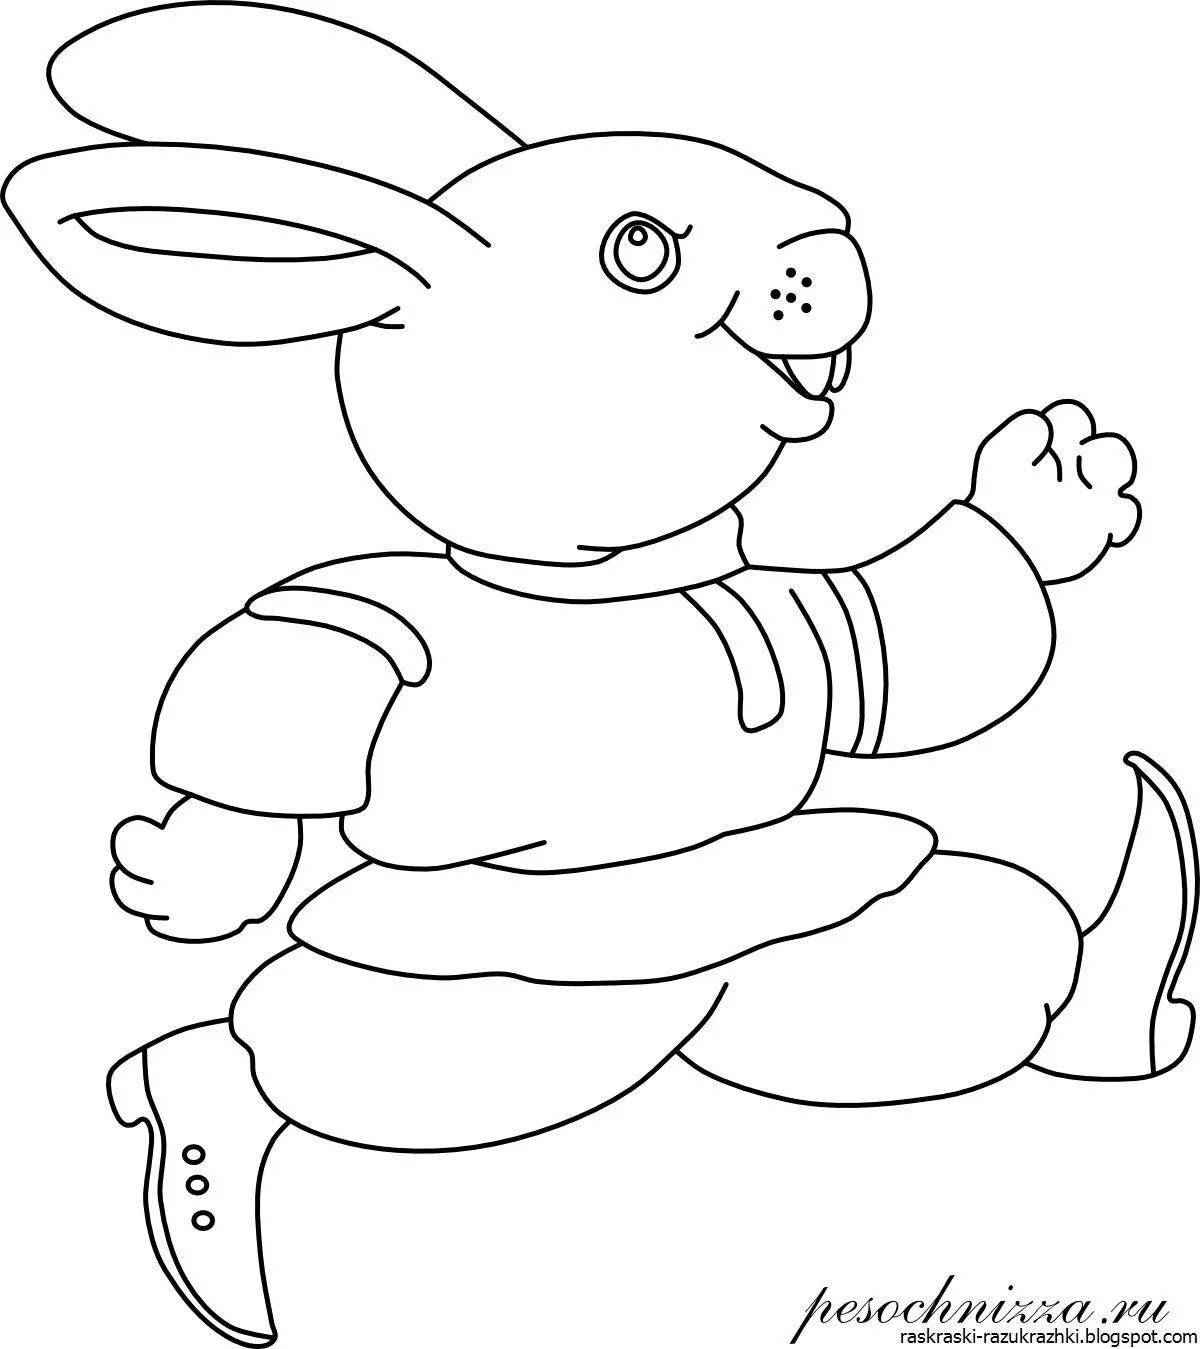 Incredible fairy tale coloring pages for kids